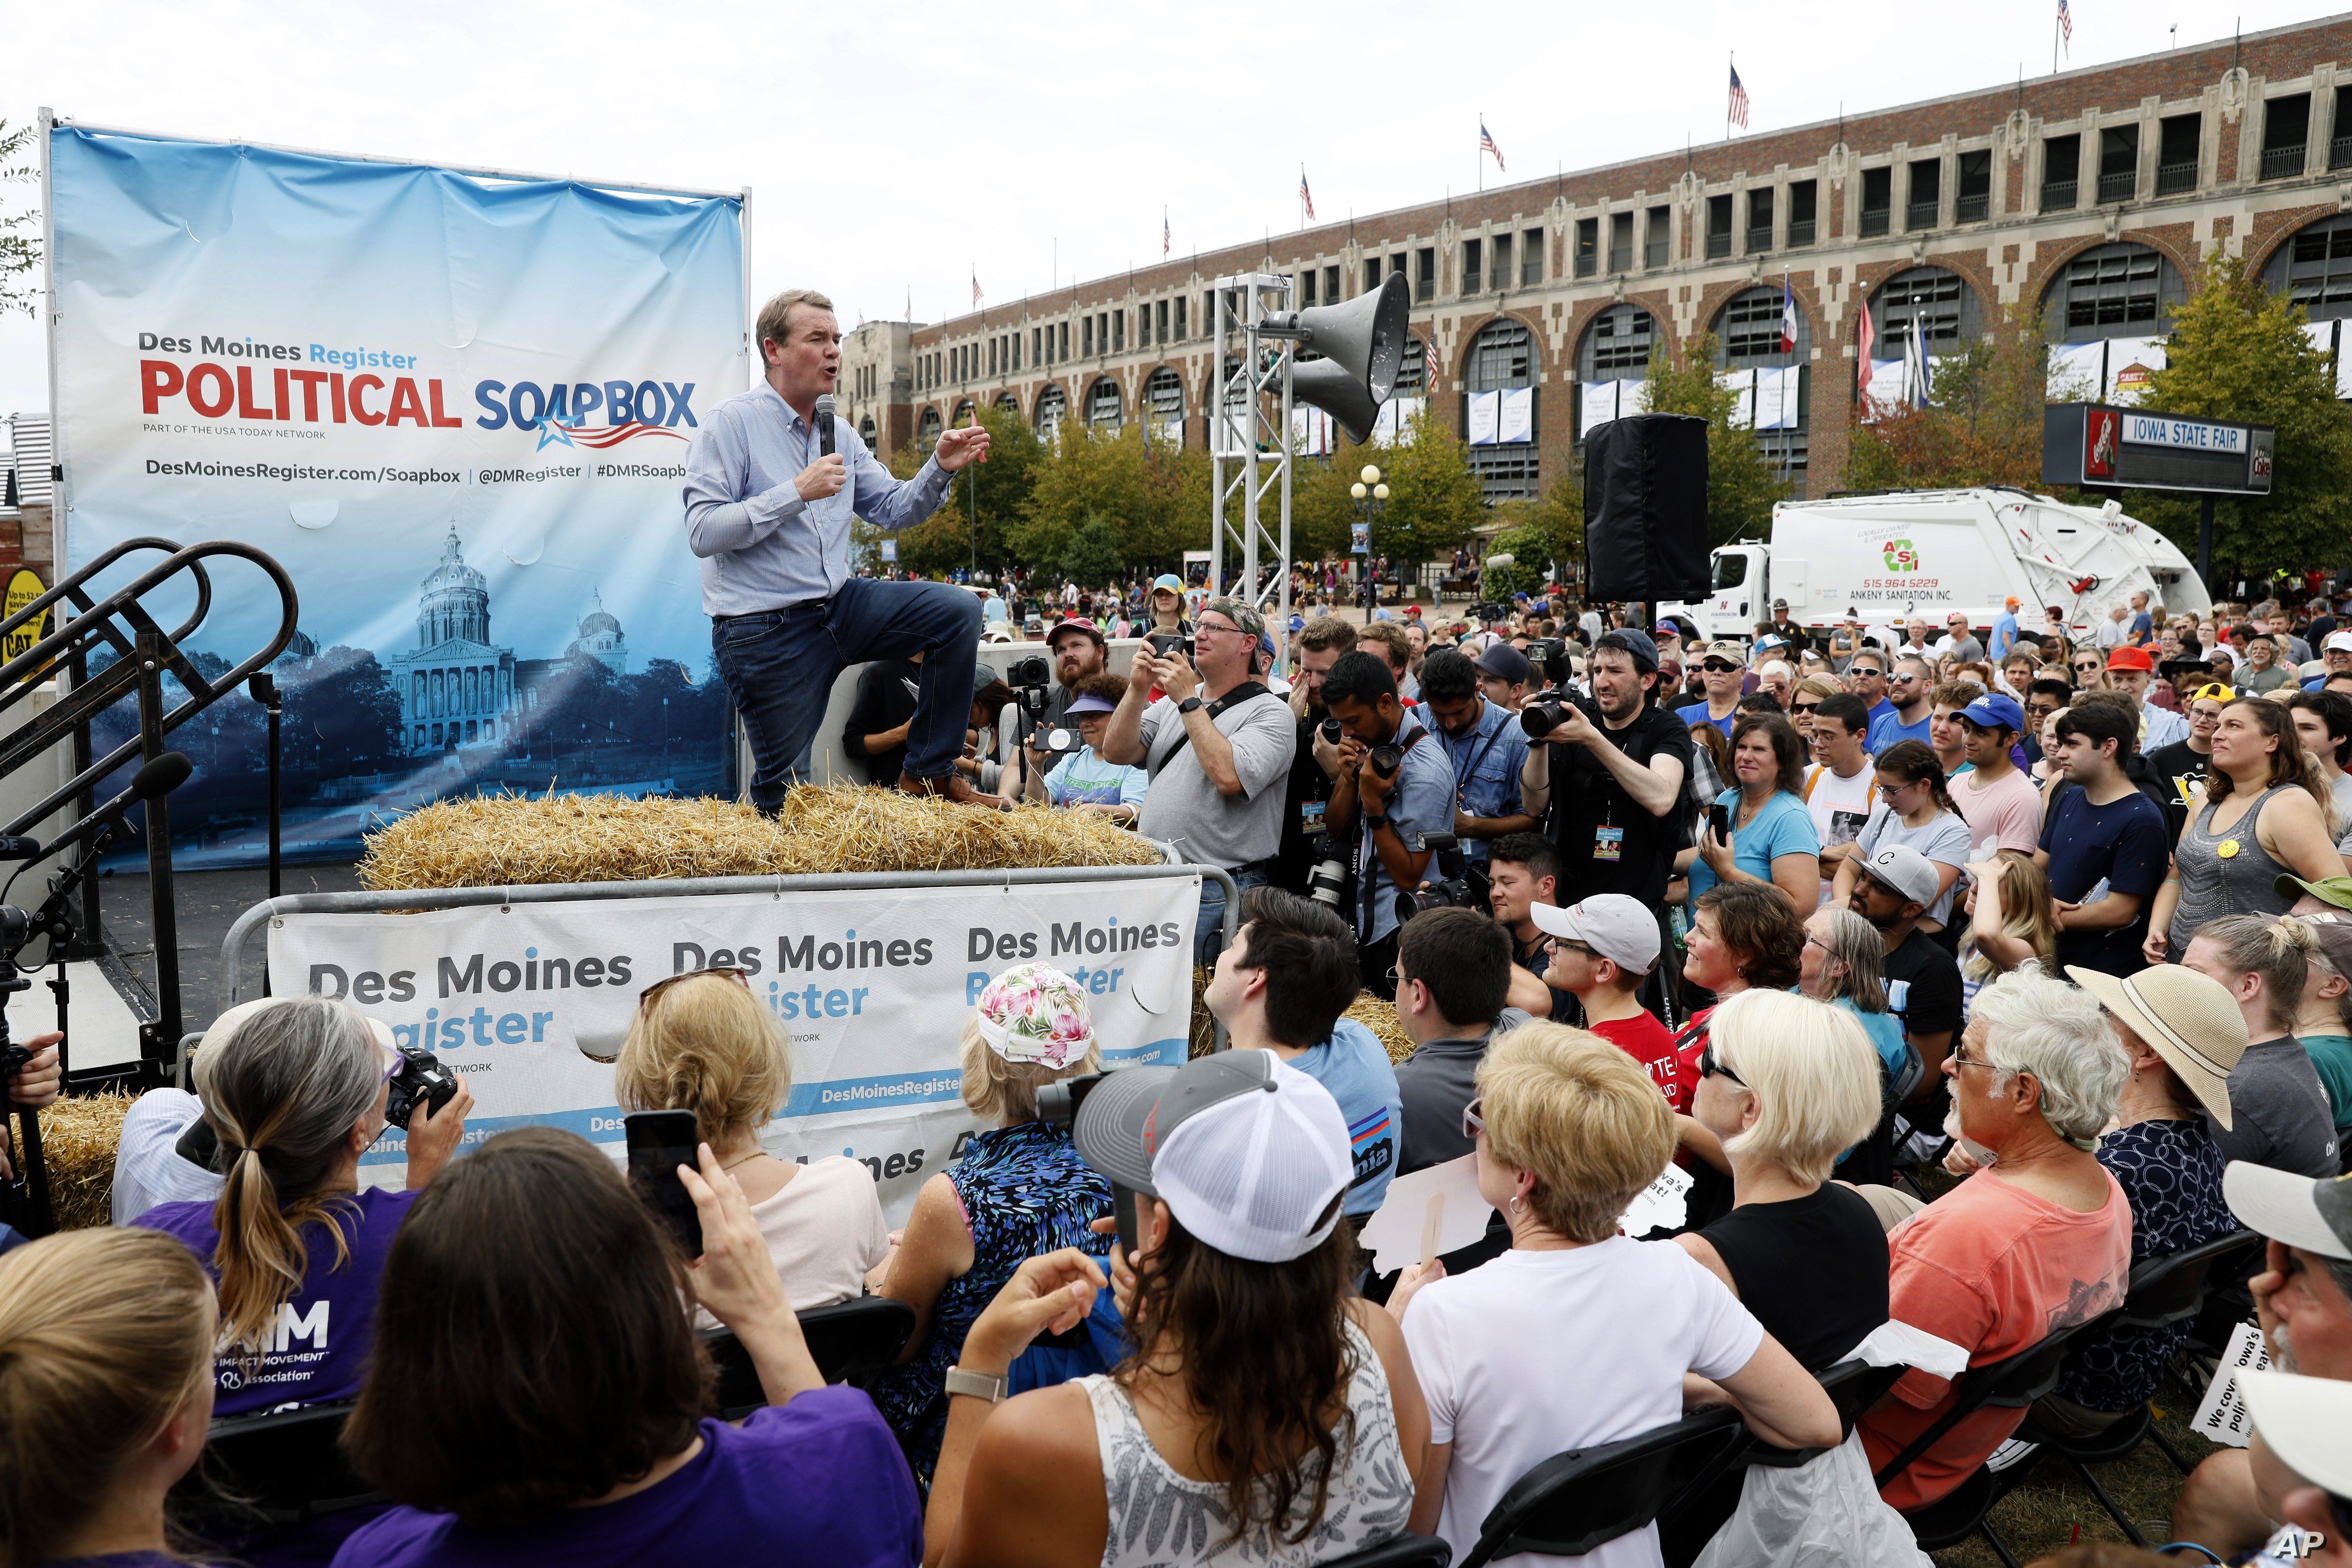 Democratic presidential candidate Sen. Michael Bennet speaks at the Des Moines Register Soapbox during a visit to the Iowa State Fair, Aug. 11, 2019, in Des Moines, Iowa.